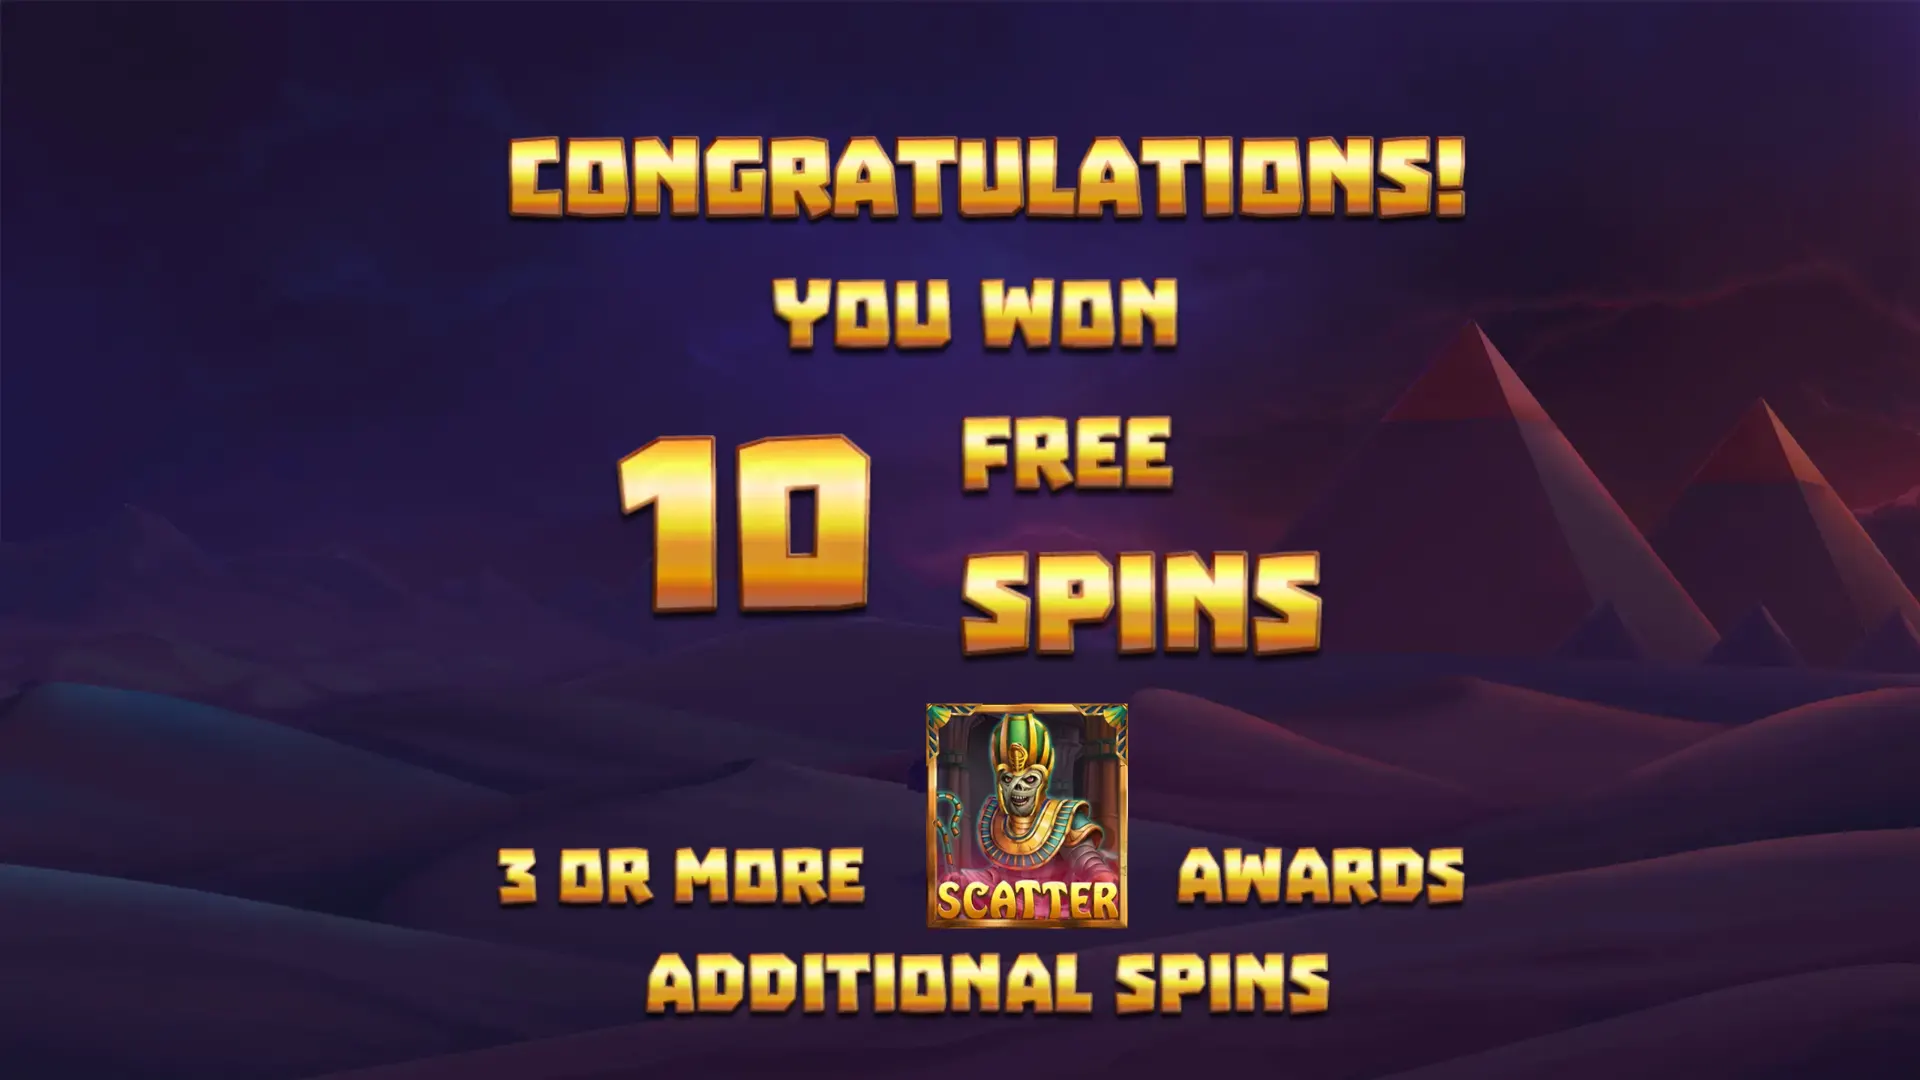 The Mummy Win Hunters Free Spins